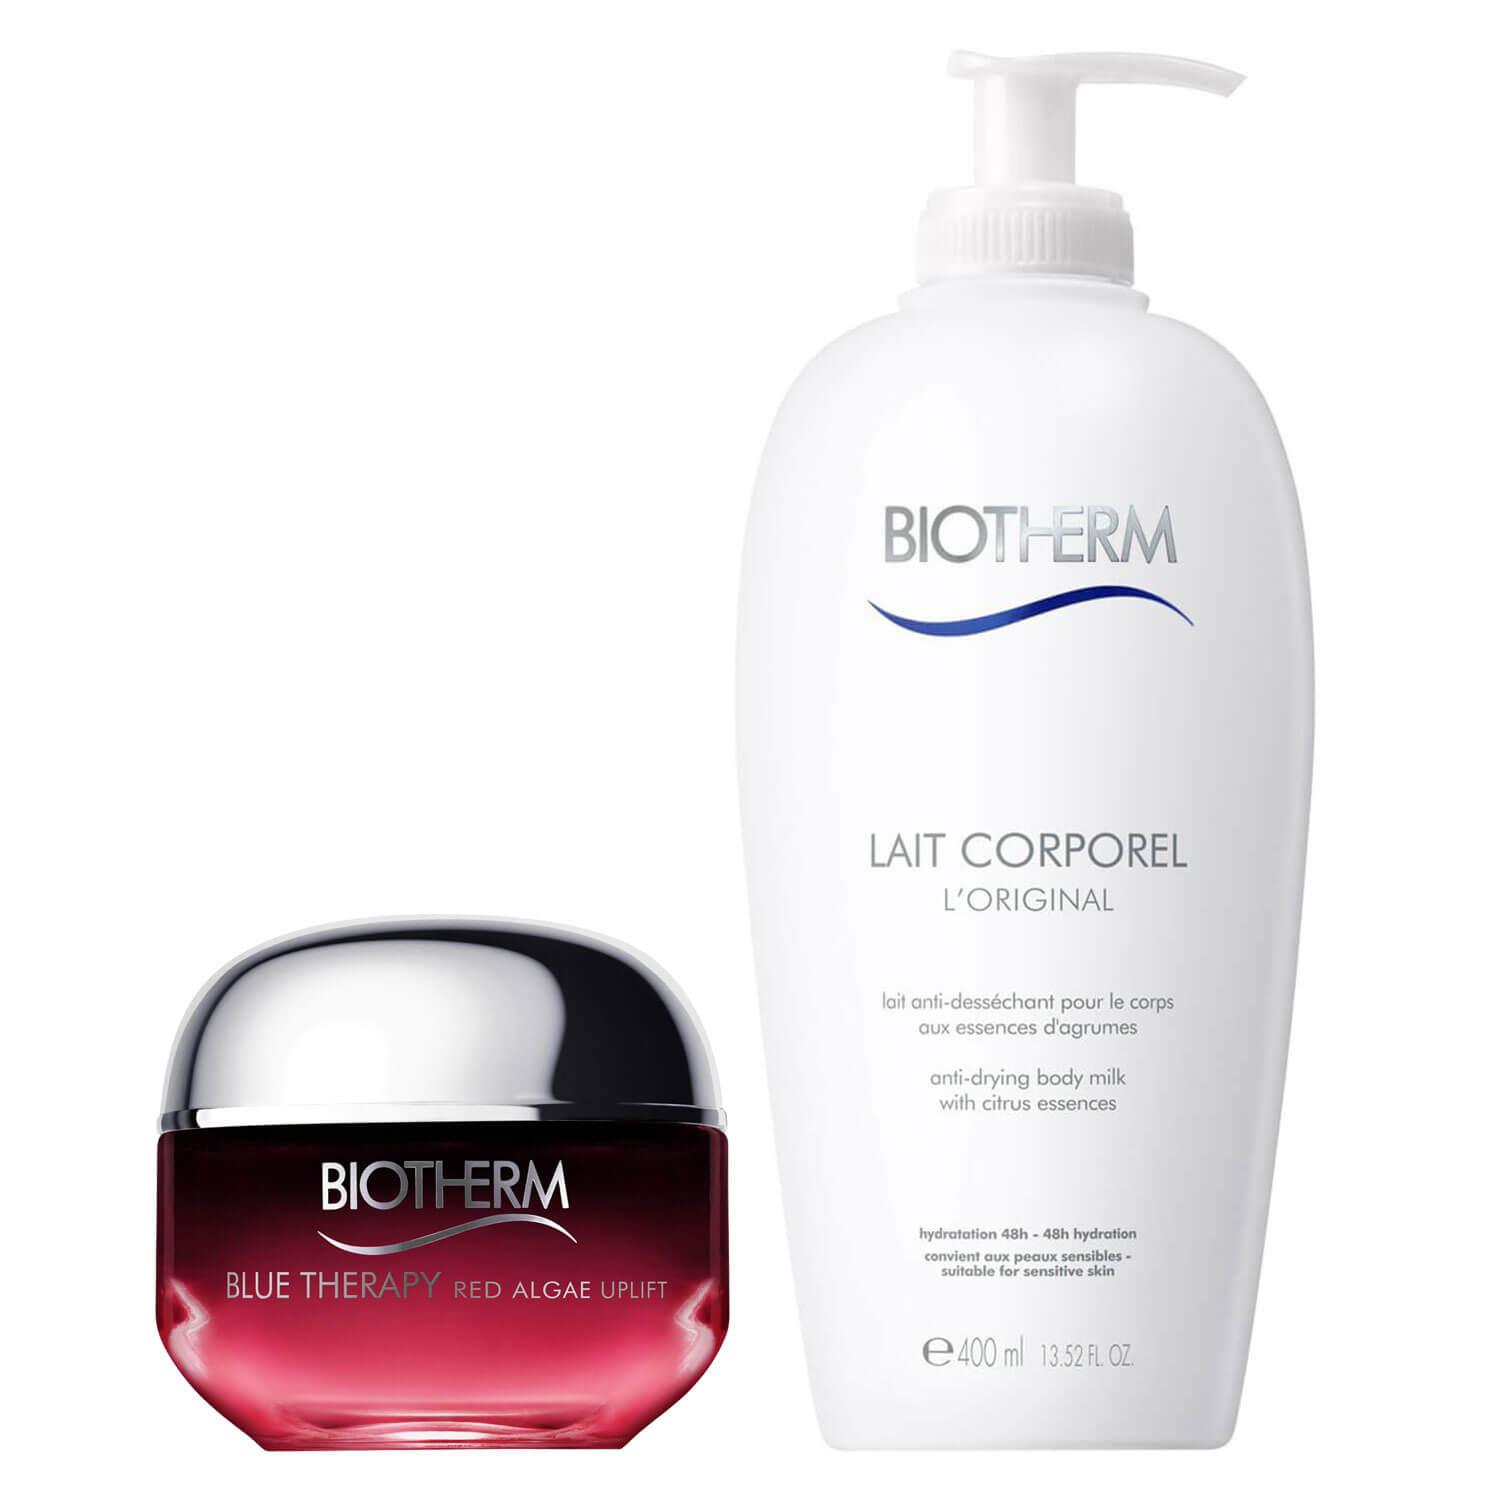 Biotherm Specials - Blue Therapy Red Algae Uplift & Lait Corporel